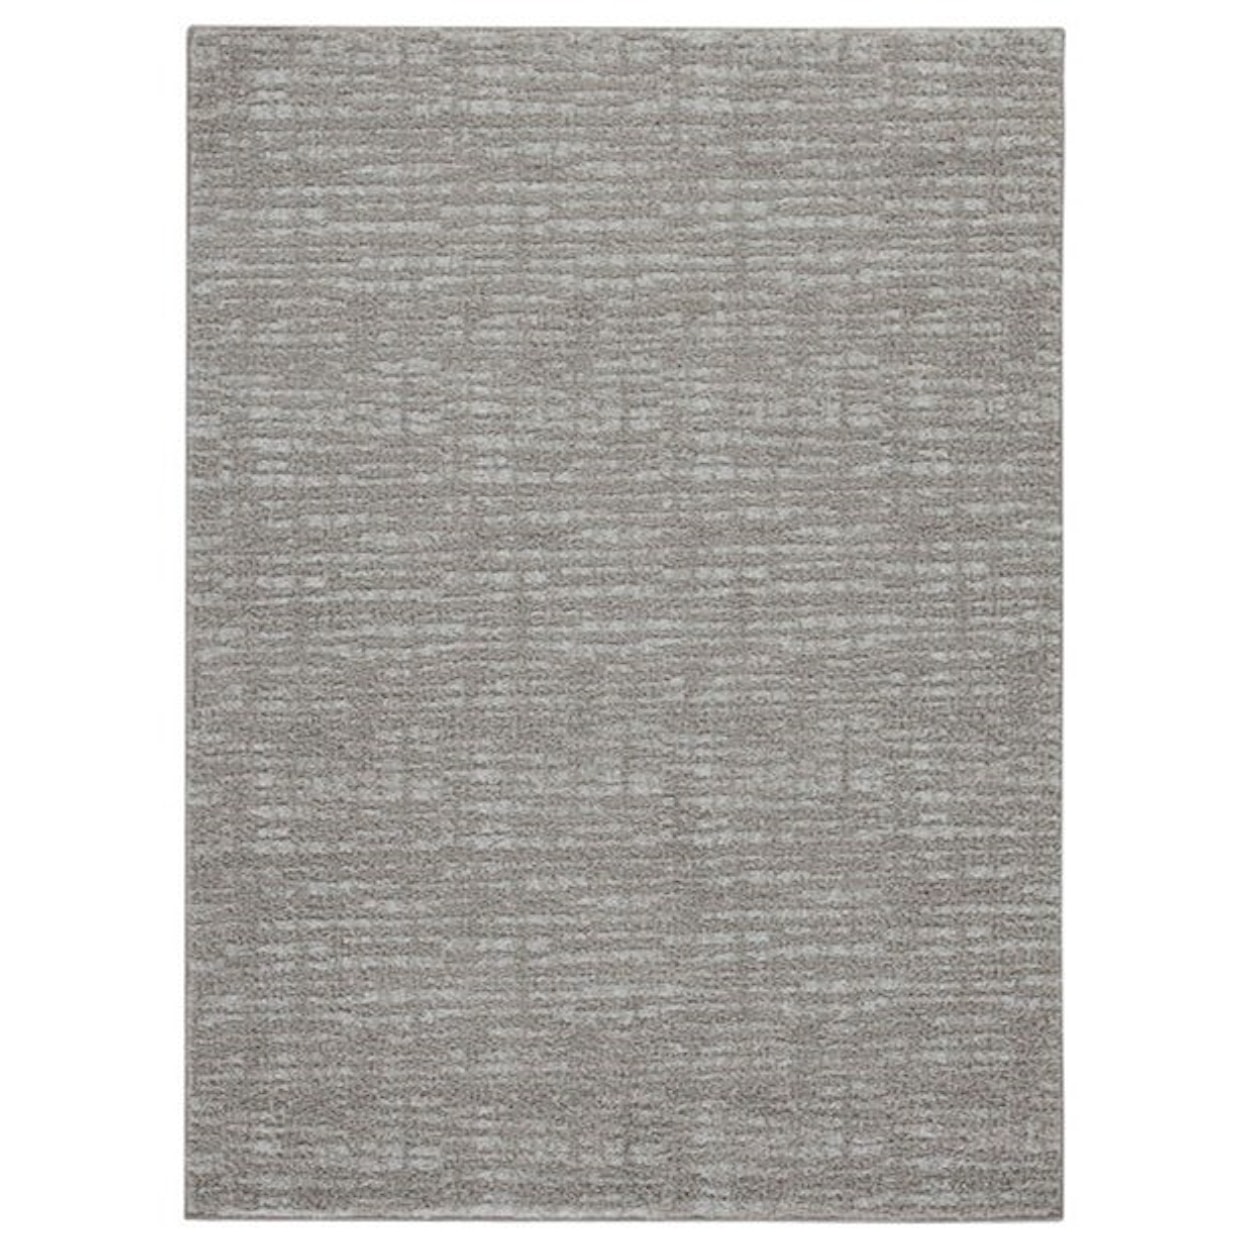 Michael Alan Select Casual Area Rugs Norris Taupe/White Large Rug